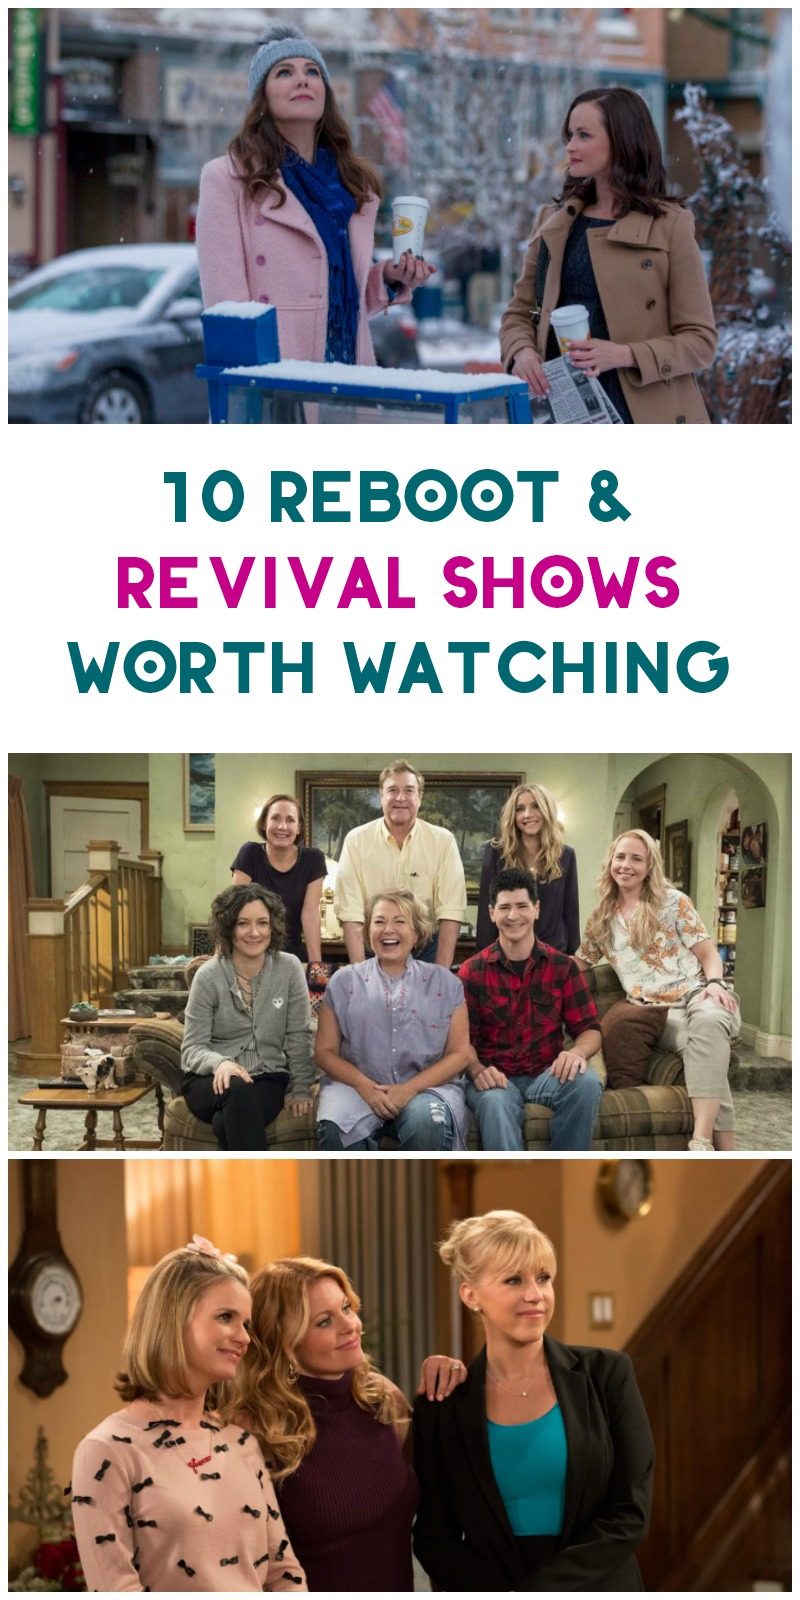 Everything old is new again, especially when it comes to revival shows! With all of our childhood favorites making a comeback, it's hard to decide what to watch first! I'm sharing my picks for 10 revival shows worth watching, along with five shows I really wish they'd bring back!